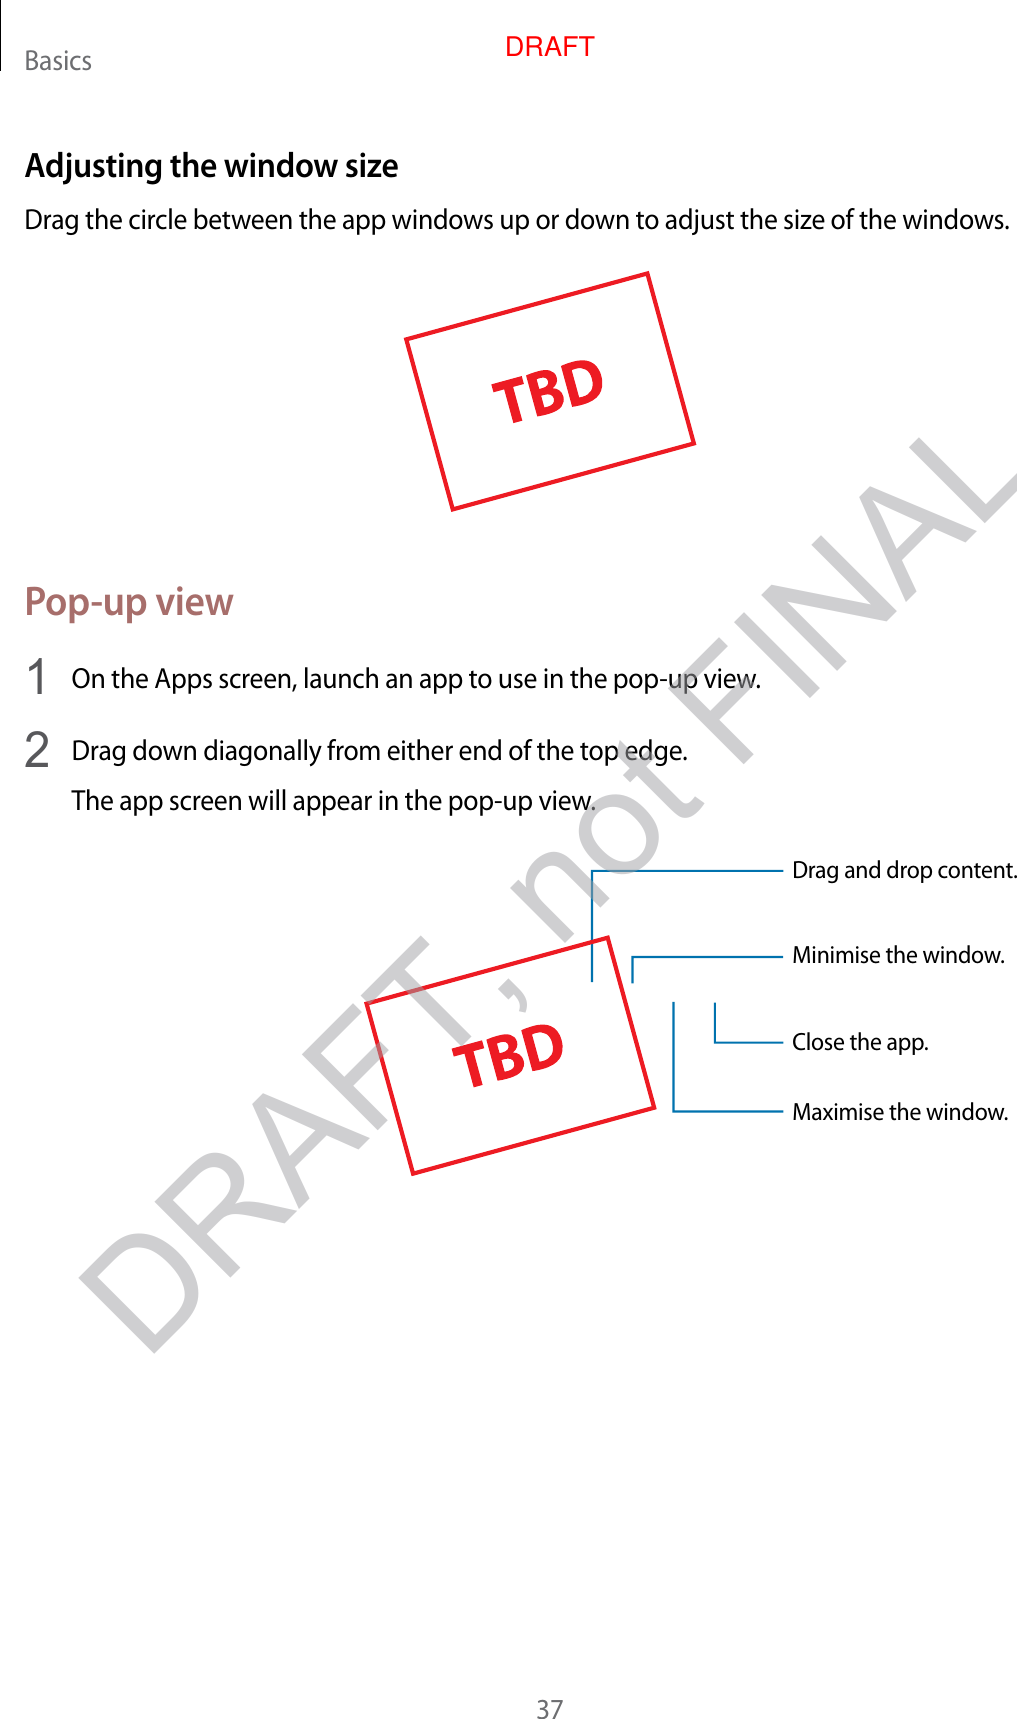 Basics37Adjusting the windo w siz eDrag the circle between the app windo w s up or down t o adjust the siz e of the window s .Pop-up view1  On the Apps screen, launch an app t o use in the pop-up view.2  Drag down diagonally fr om either end of the t op edge .The app screen will appear in the pop-up view.Minimise the window.Close the app .Maximise the window.Drag and drop c ont ent.DRAFT, not FINALDRAFT